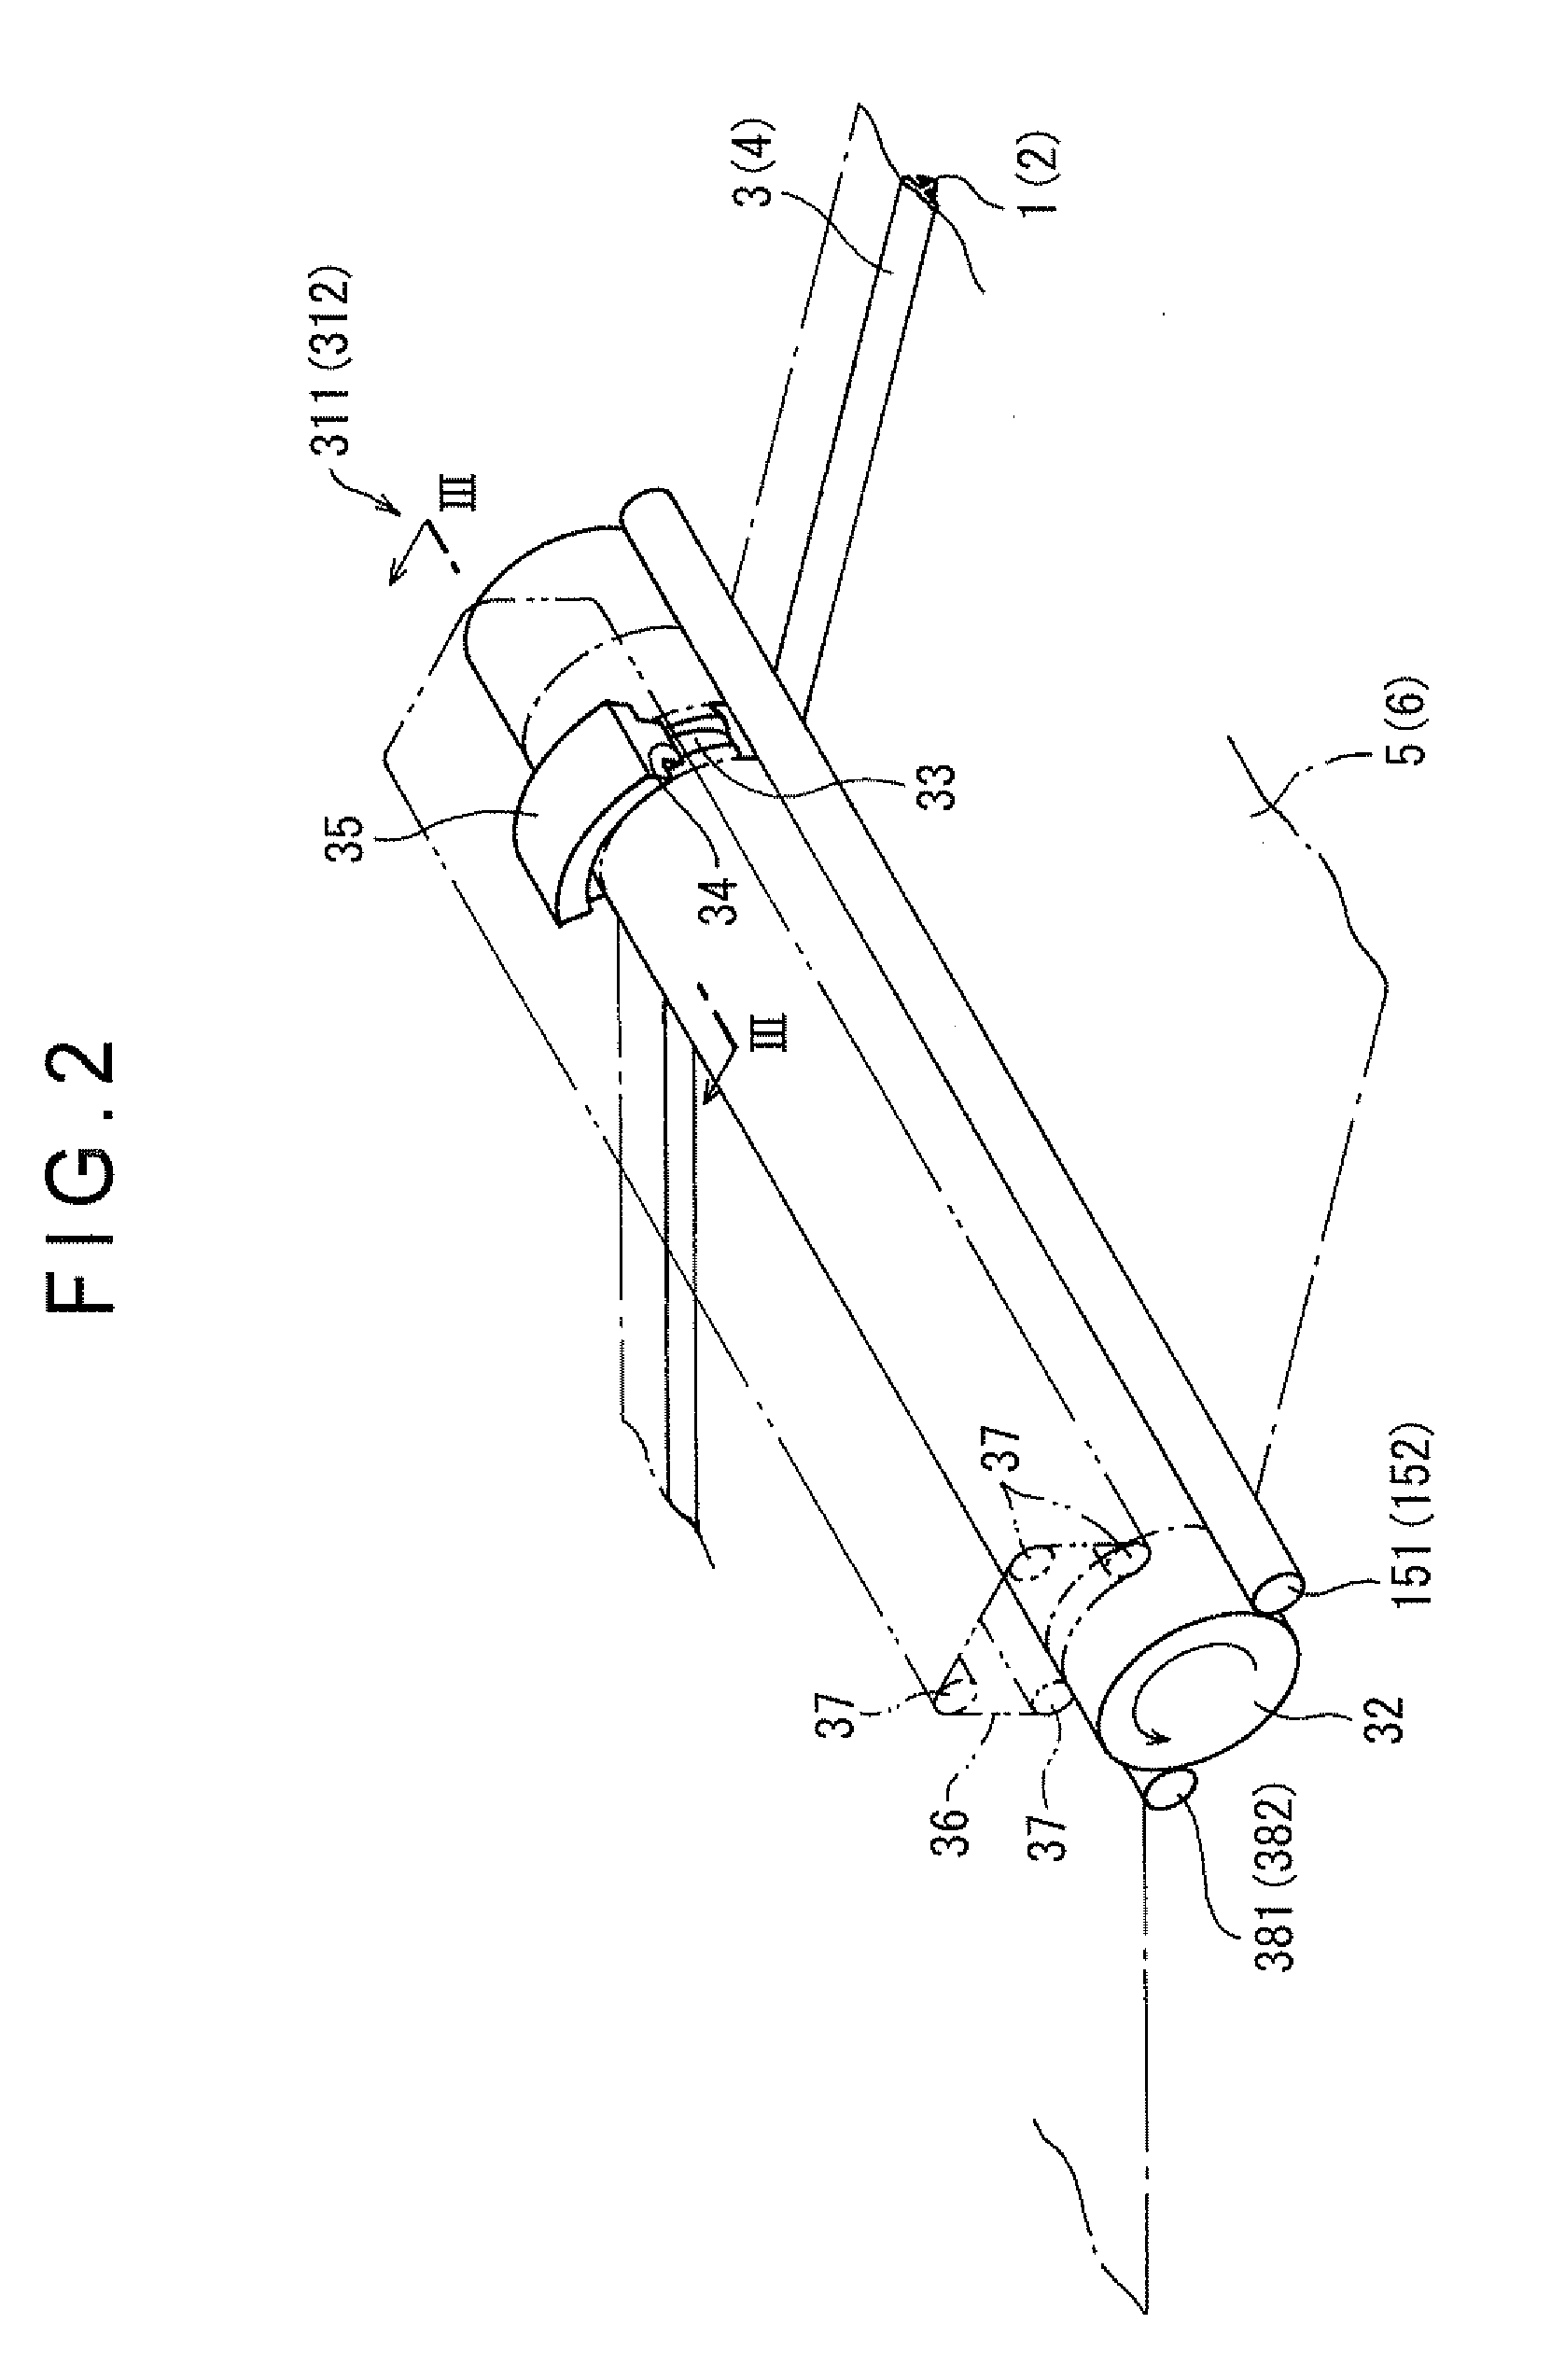 Method and Device for Manufacturing Bag with Clamping Device